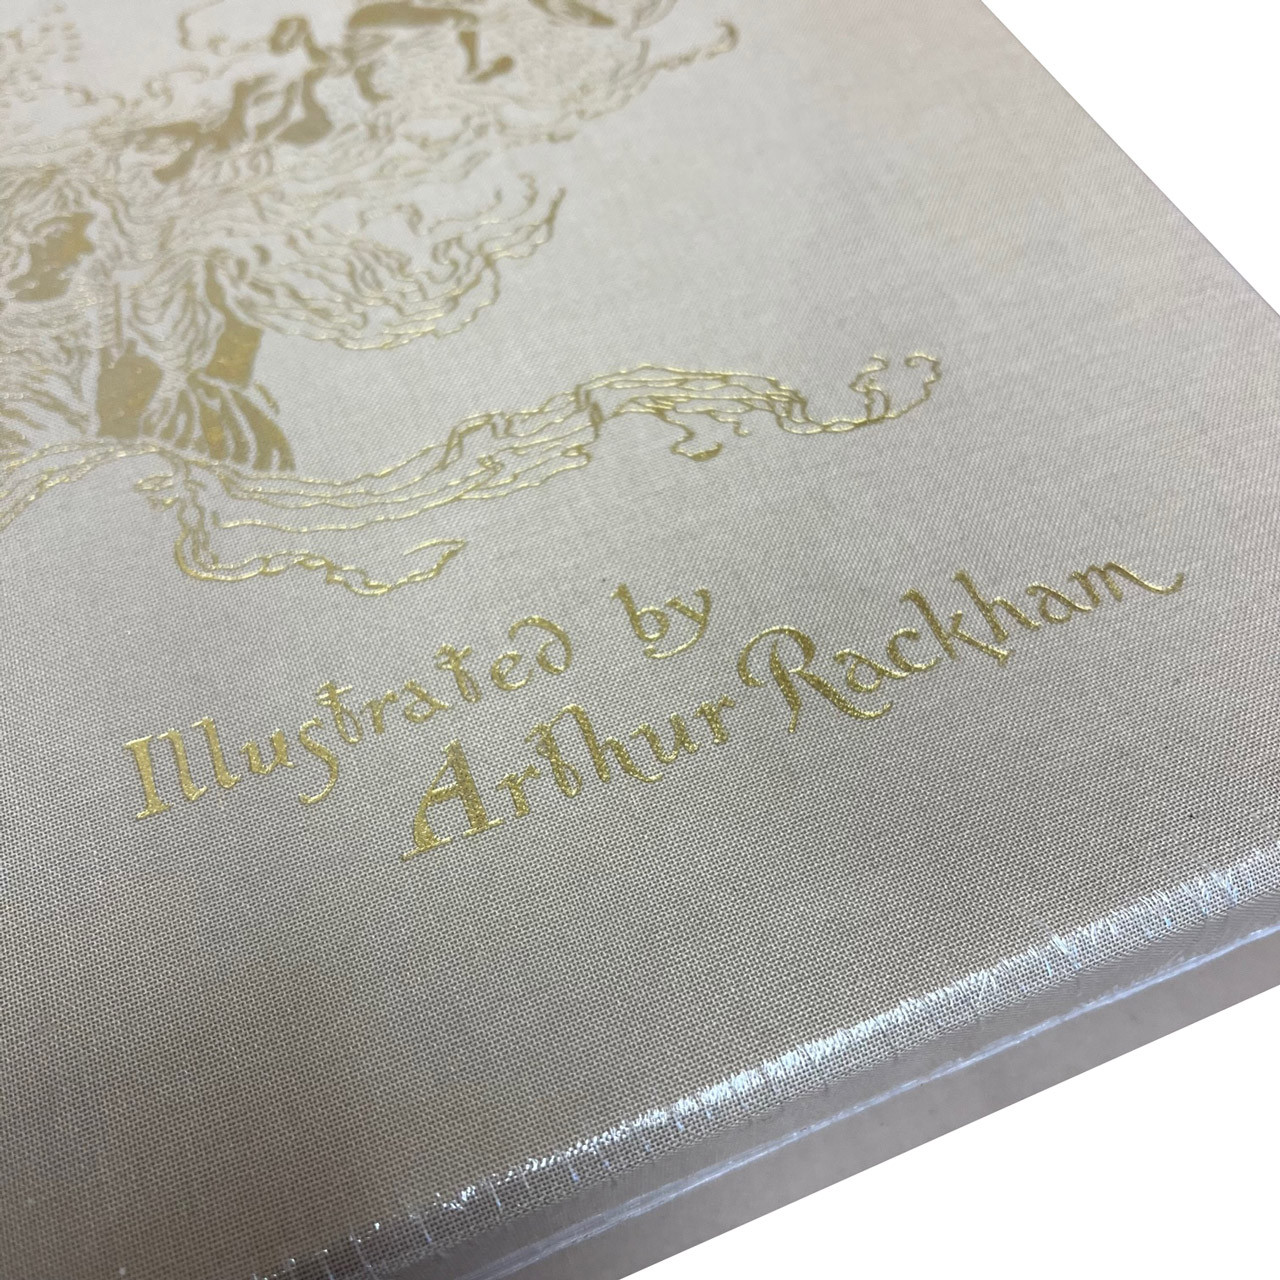 "Grimm's Fairy Tales" Slipcased Deluxe Artist Limited Edition, Leather Bound Collector's Edition of 800 [Sealed]